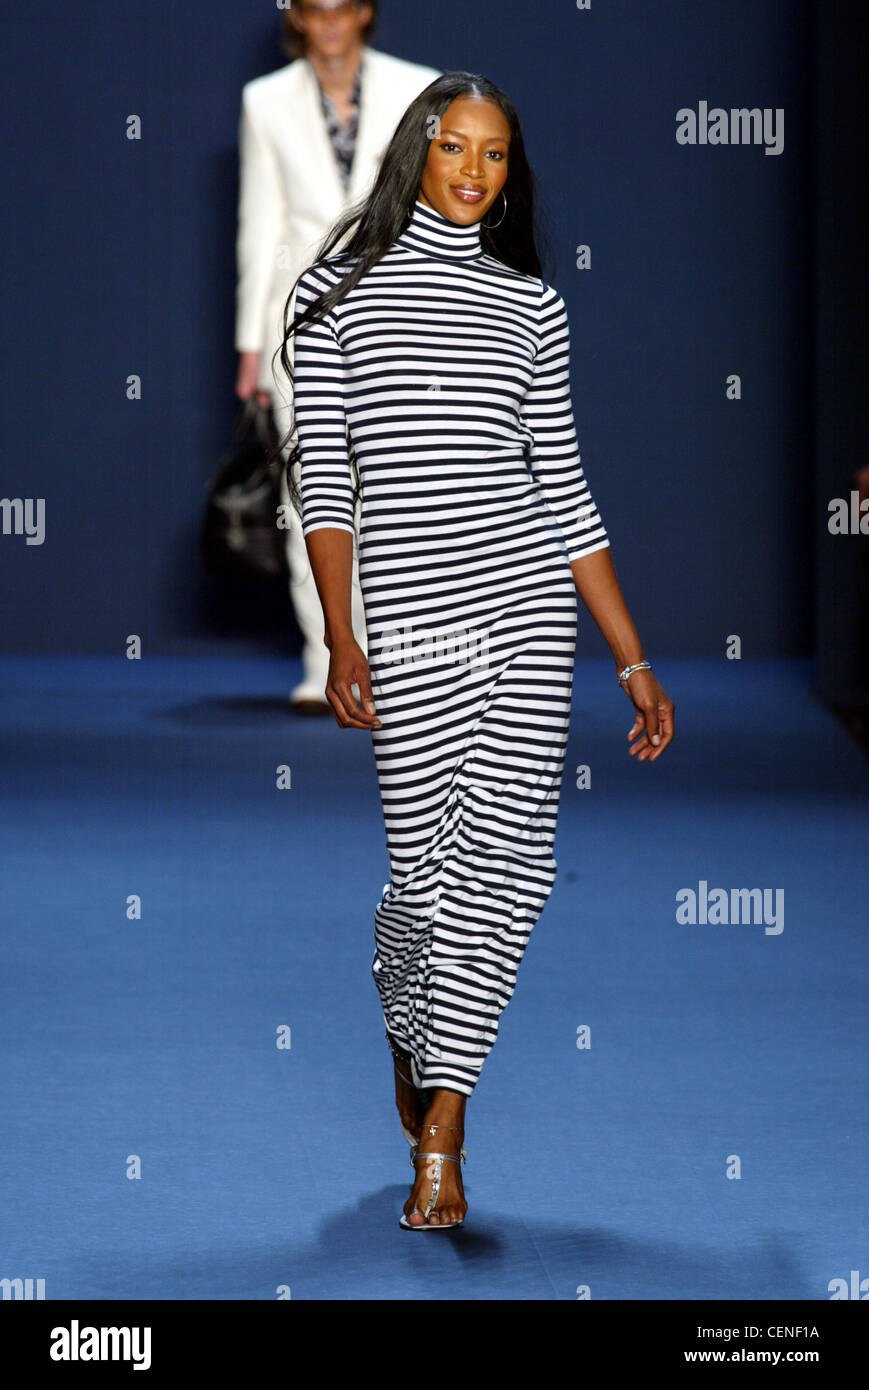 Tommy Hilfiger New York Ready To Wear Spring Summer Model Naomi Campbell  long black hair wearing long black and white striped Stock Photo - Alamy